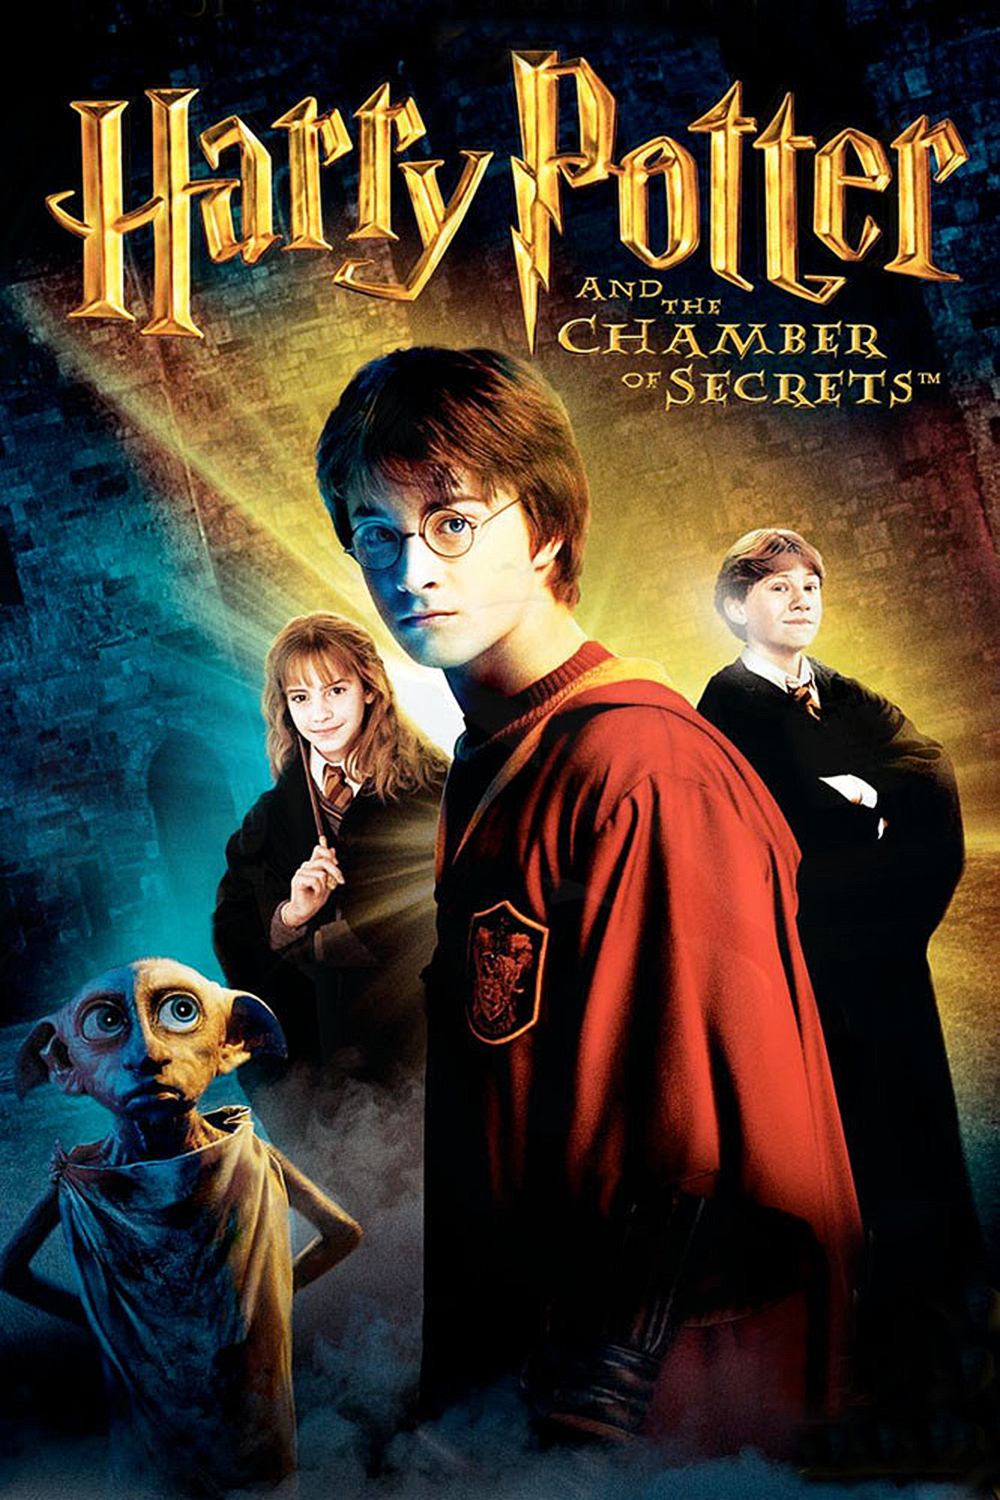 Harry Potter and The Chamber of Secrets Book - wallpaper.